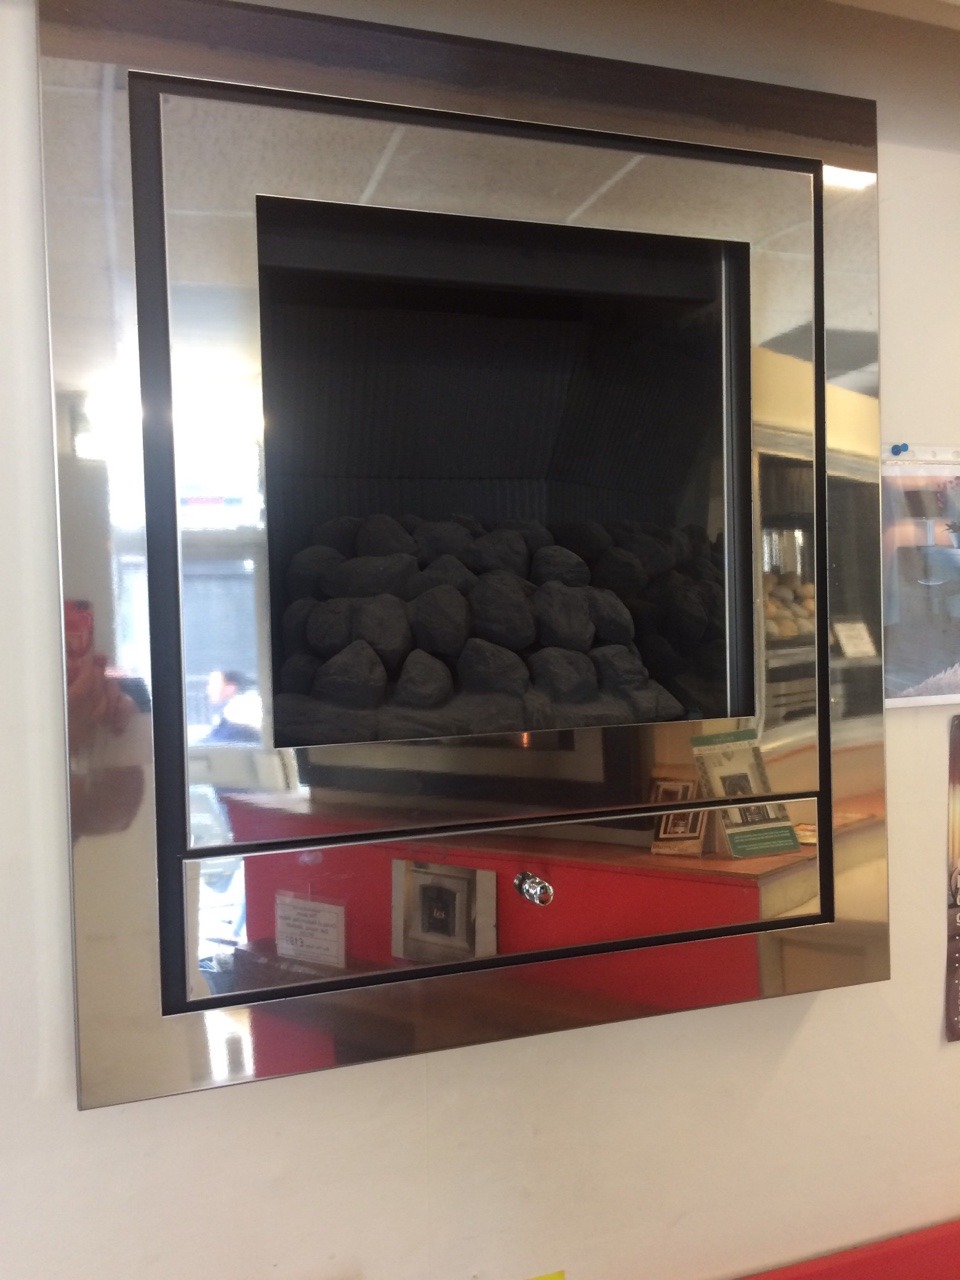 Contemporary gas hole in wall fires from only £549. Cheapest in Liverpool. Tel: 0151 933 0783. Fireplace Interior Studio, fitting service available too.